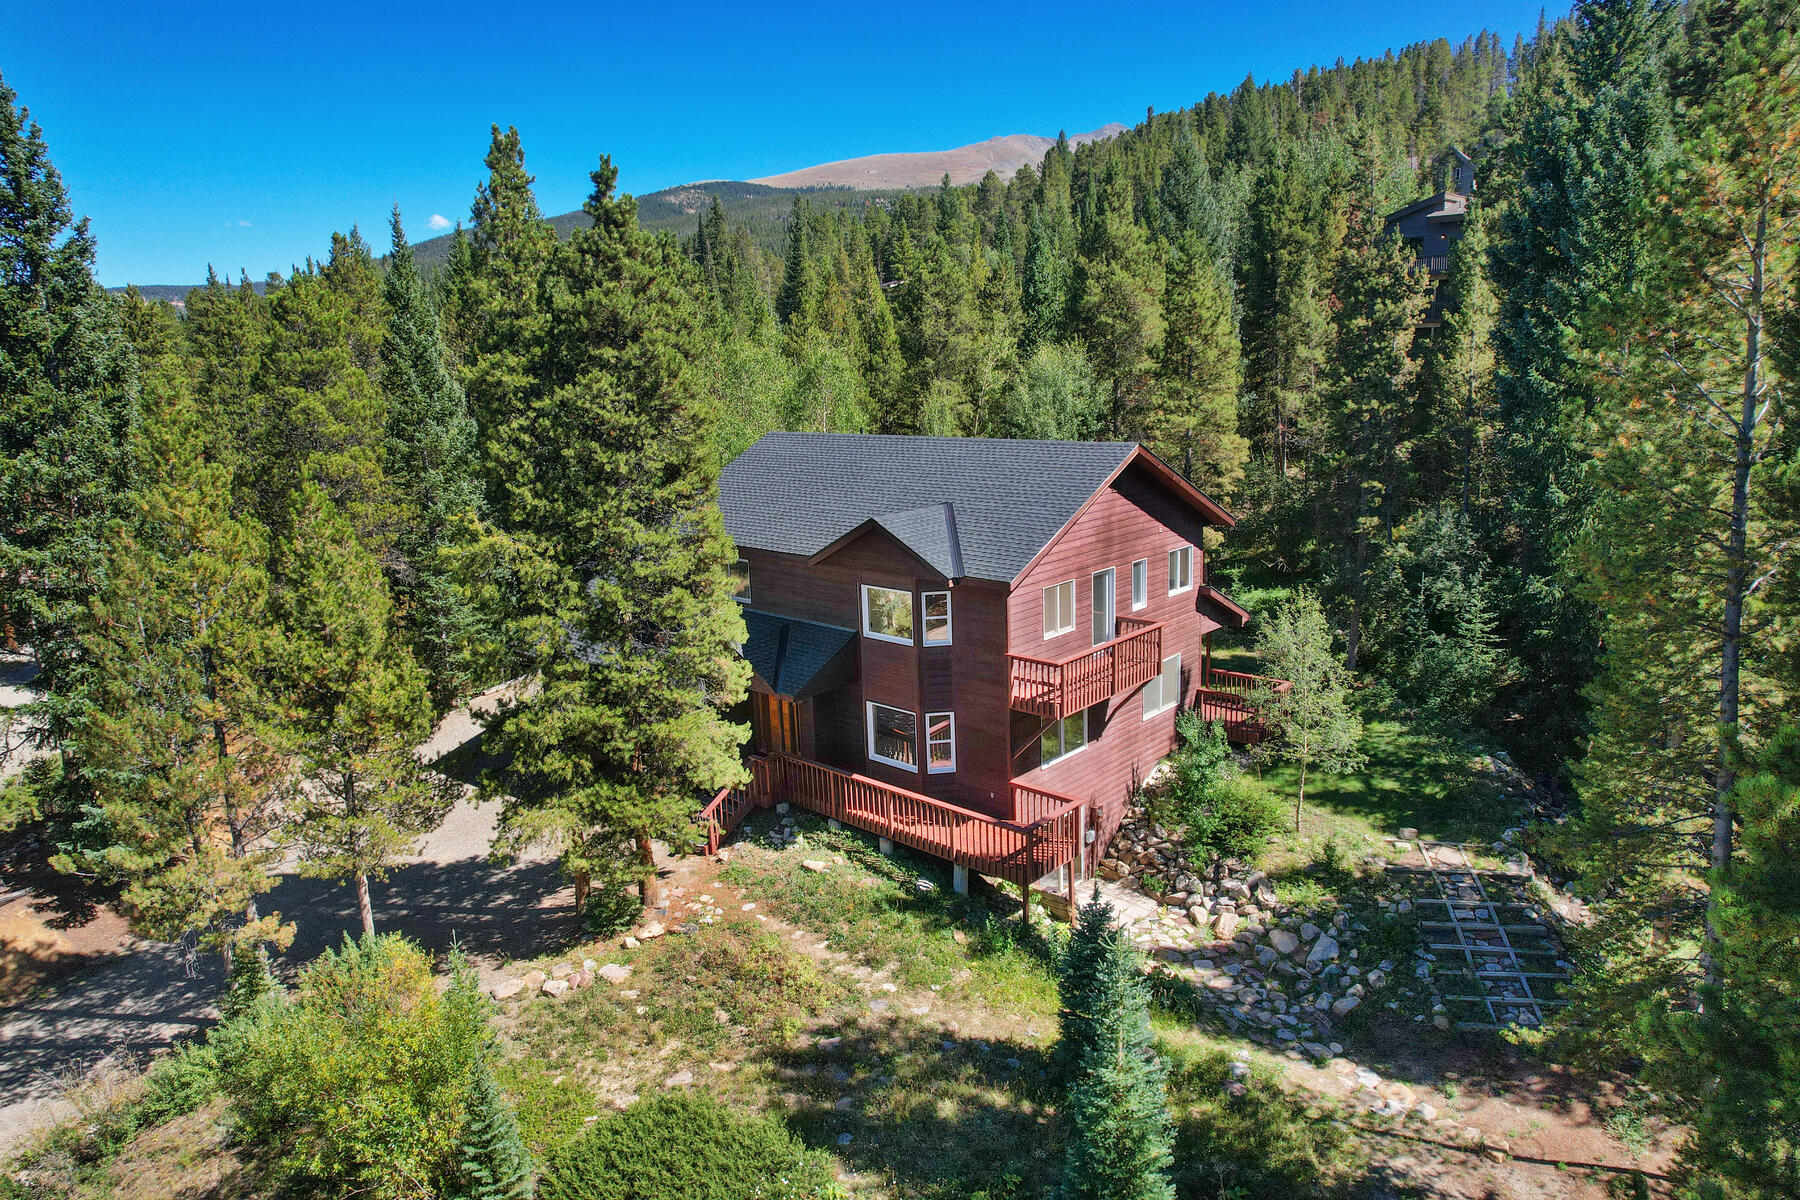 Learn More About Summit County, Colorado's Real Estate Opportunities!